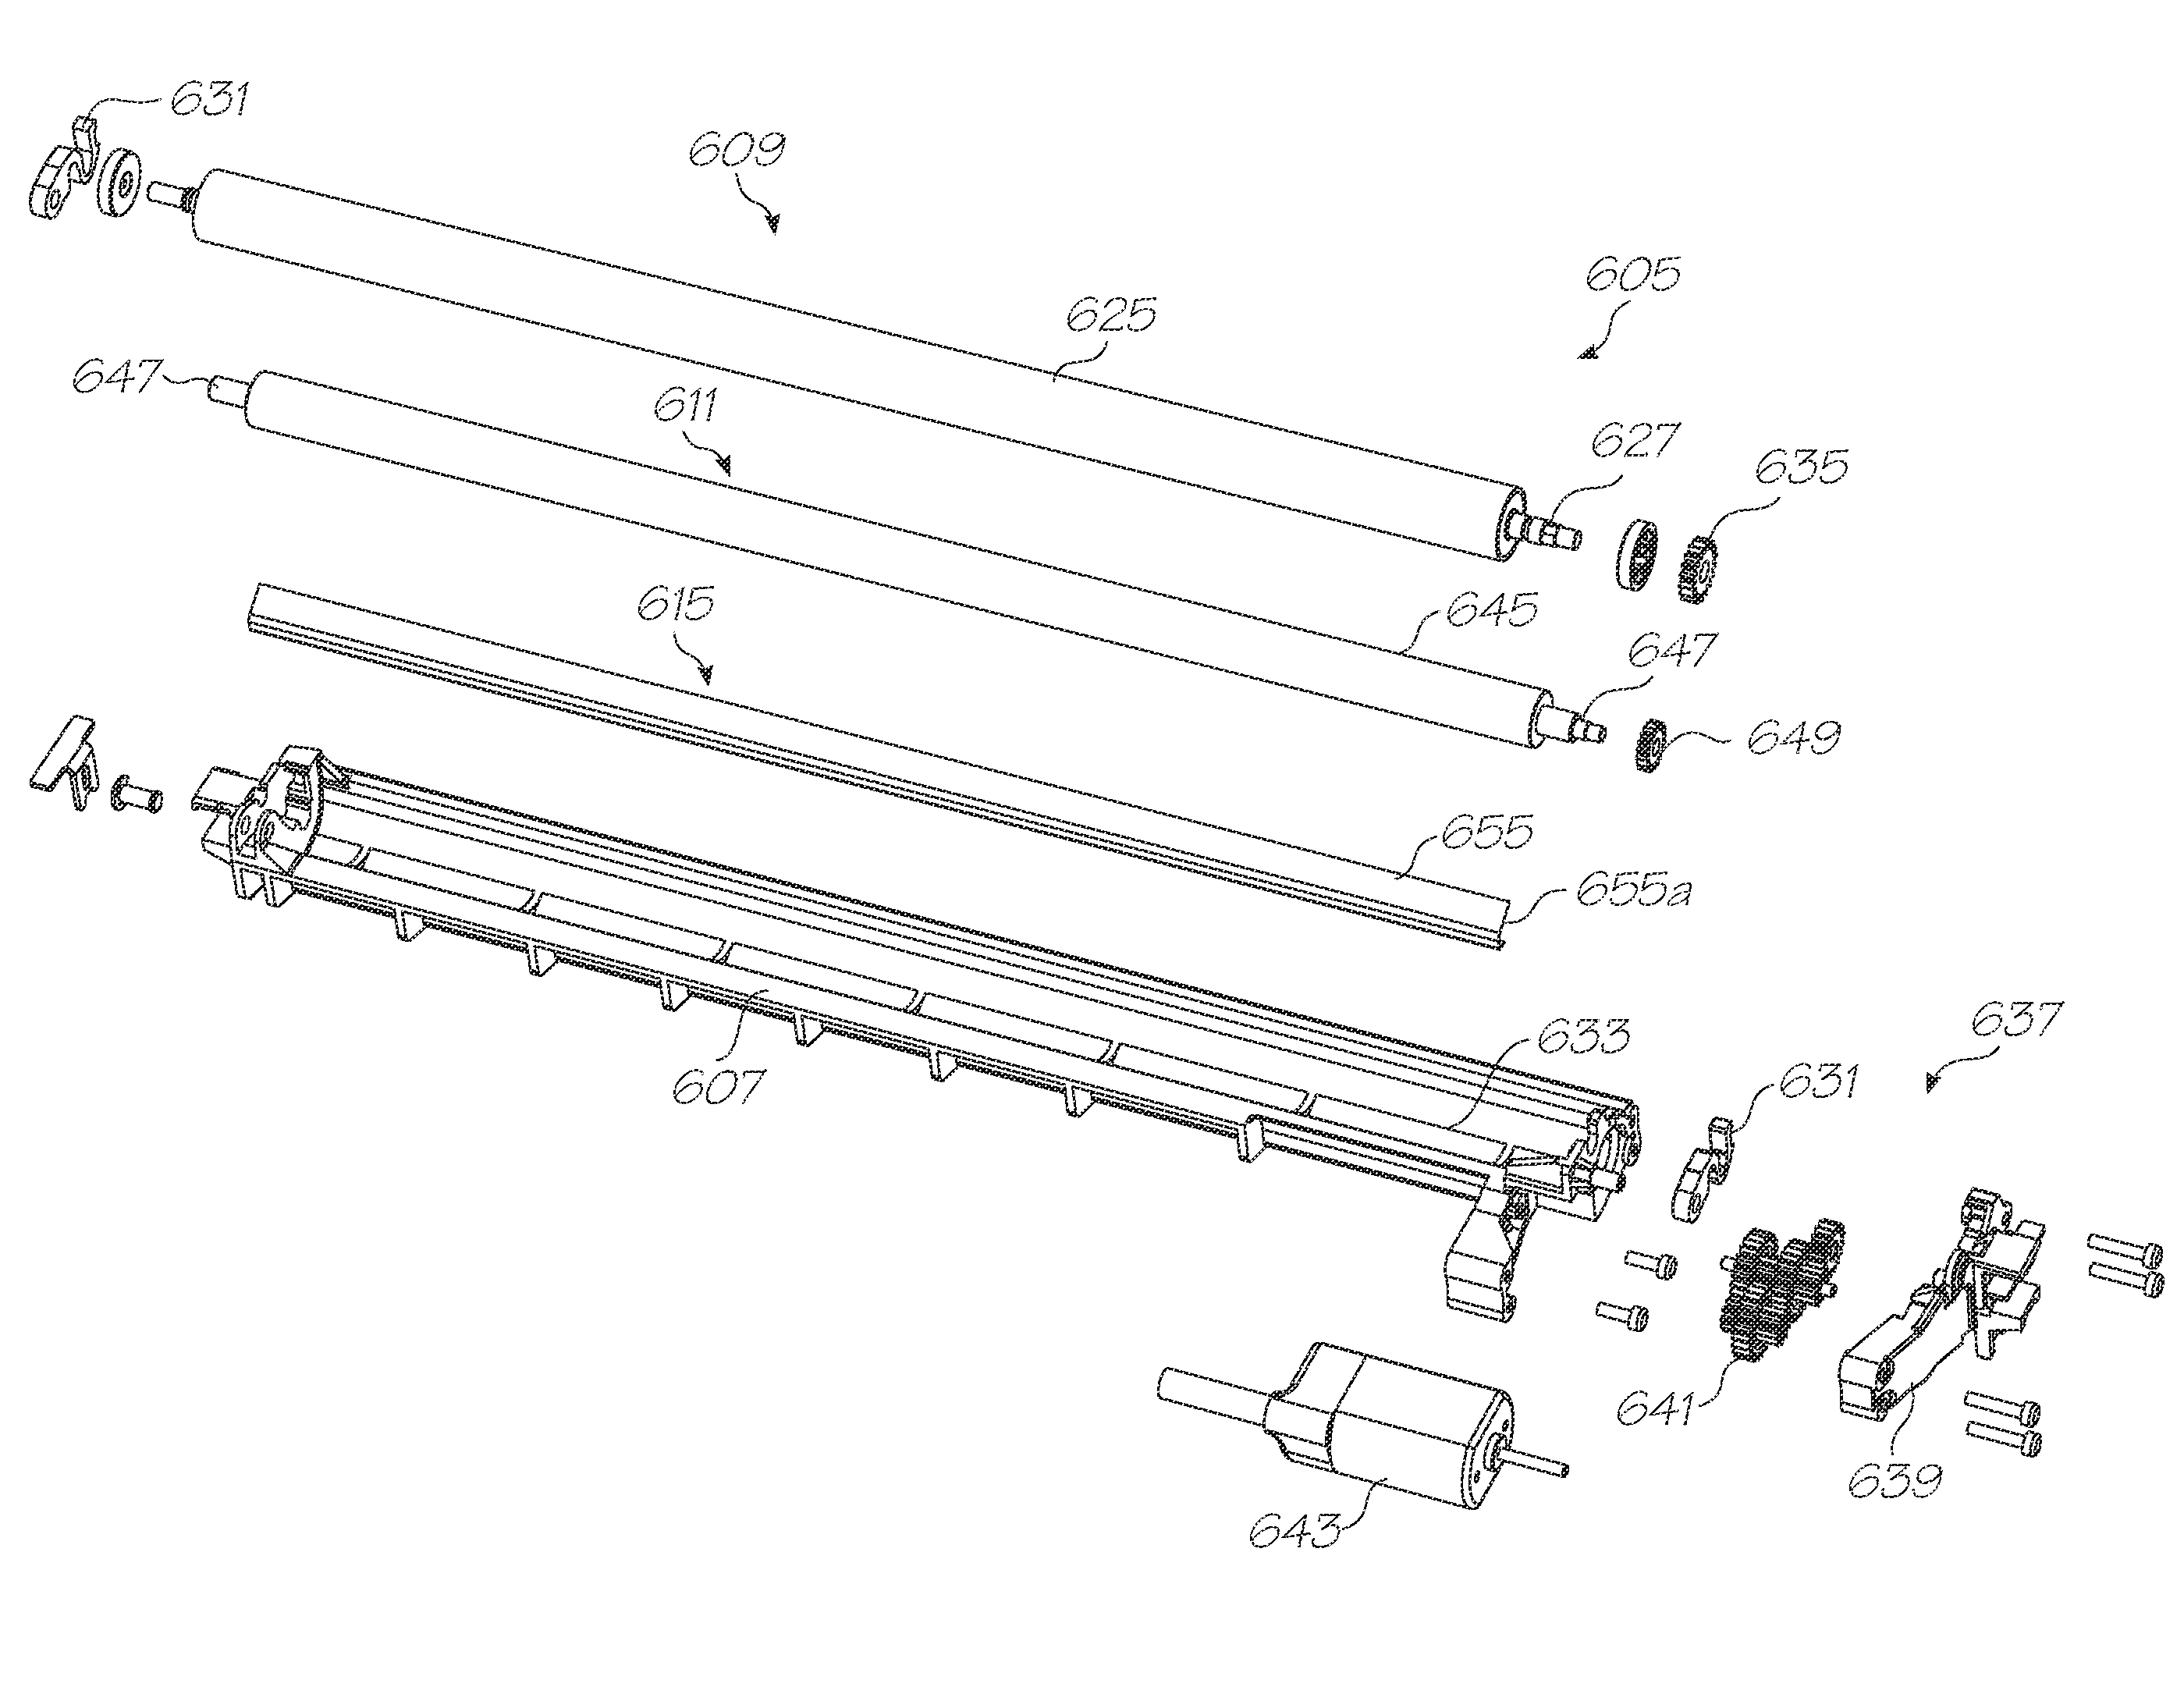 Maintenance apparatus having rotatable wiper and transfer rollers for printhead